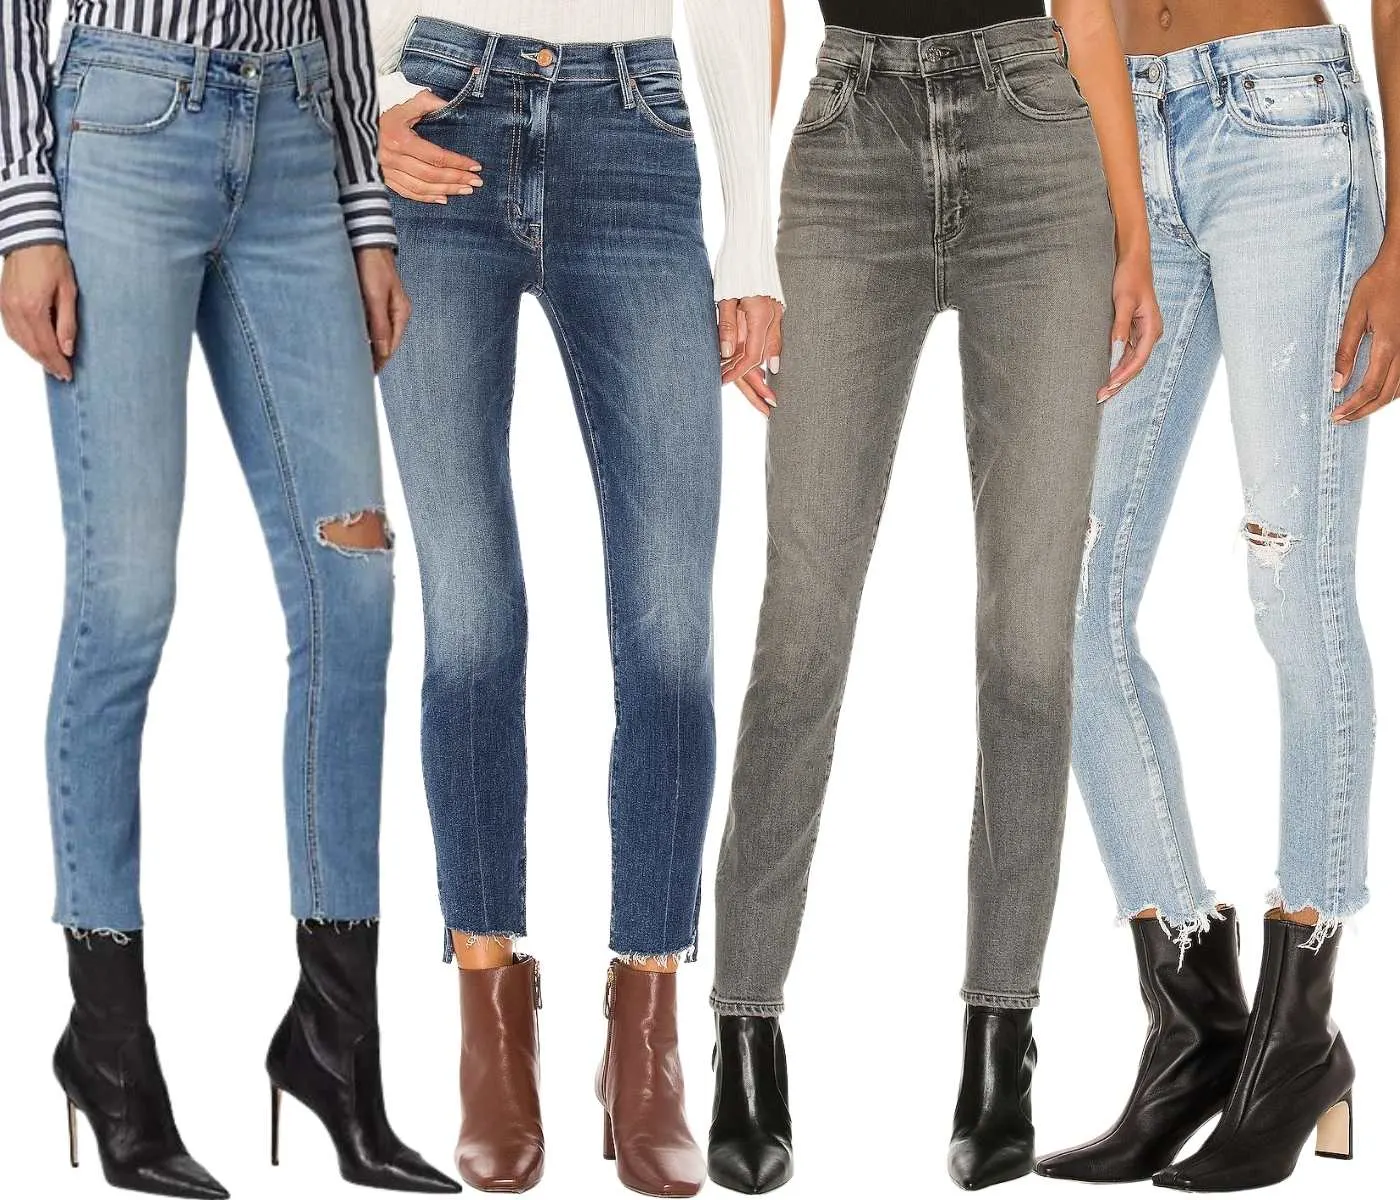 Collage of cropped view of 4 women's legs wearing different ankle boots with slim jeans.